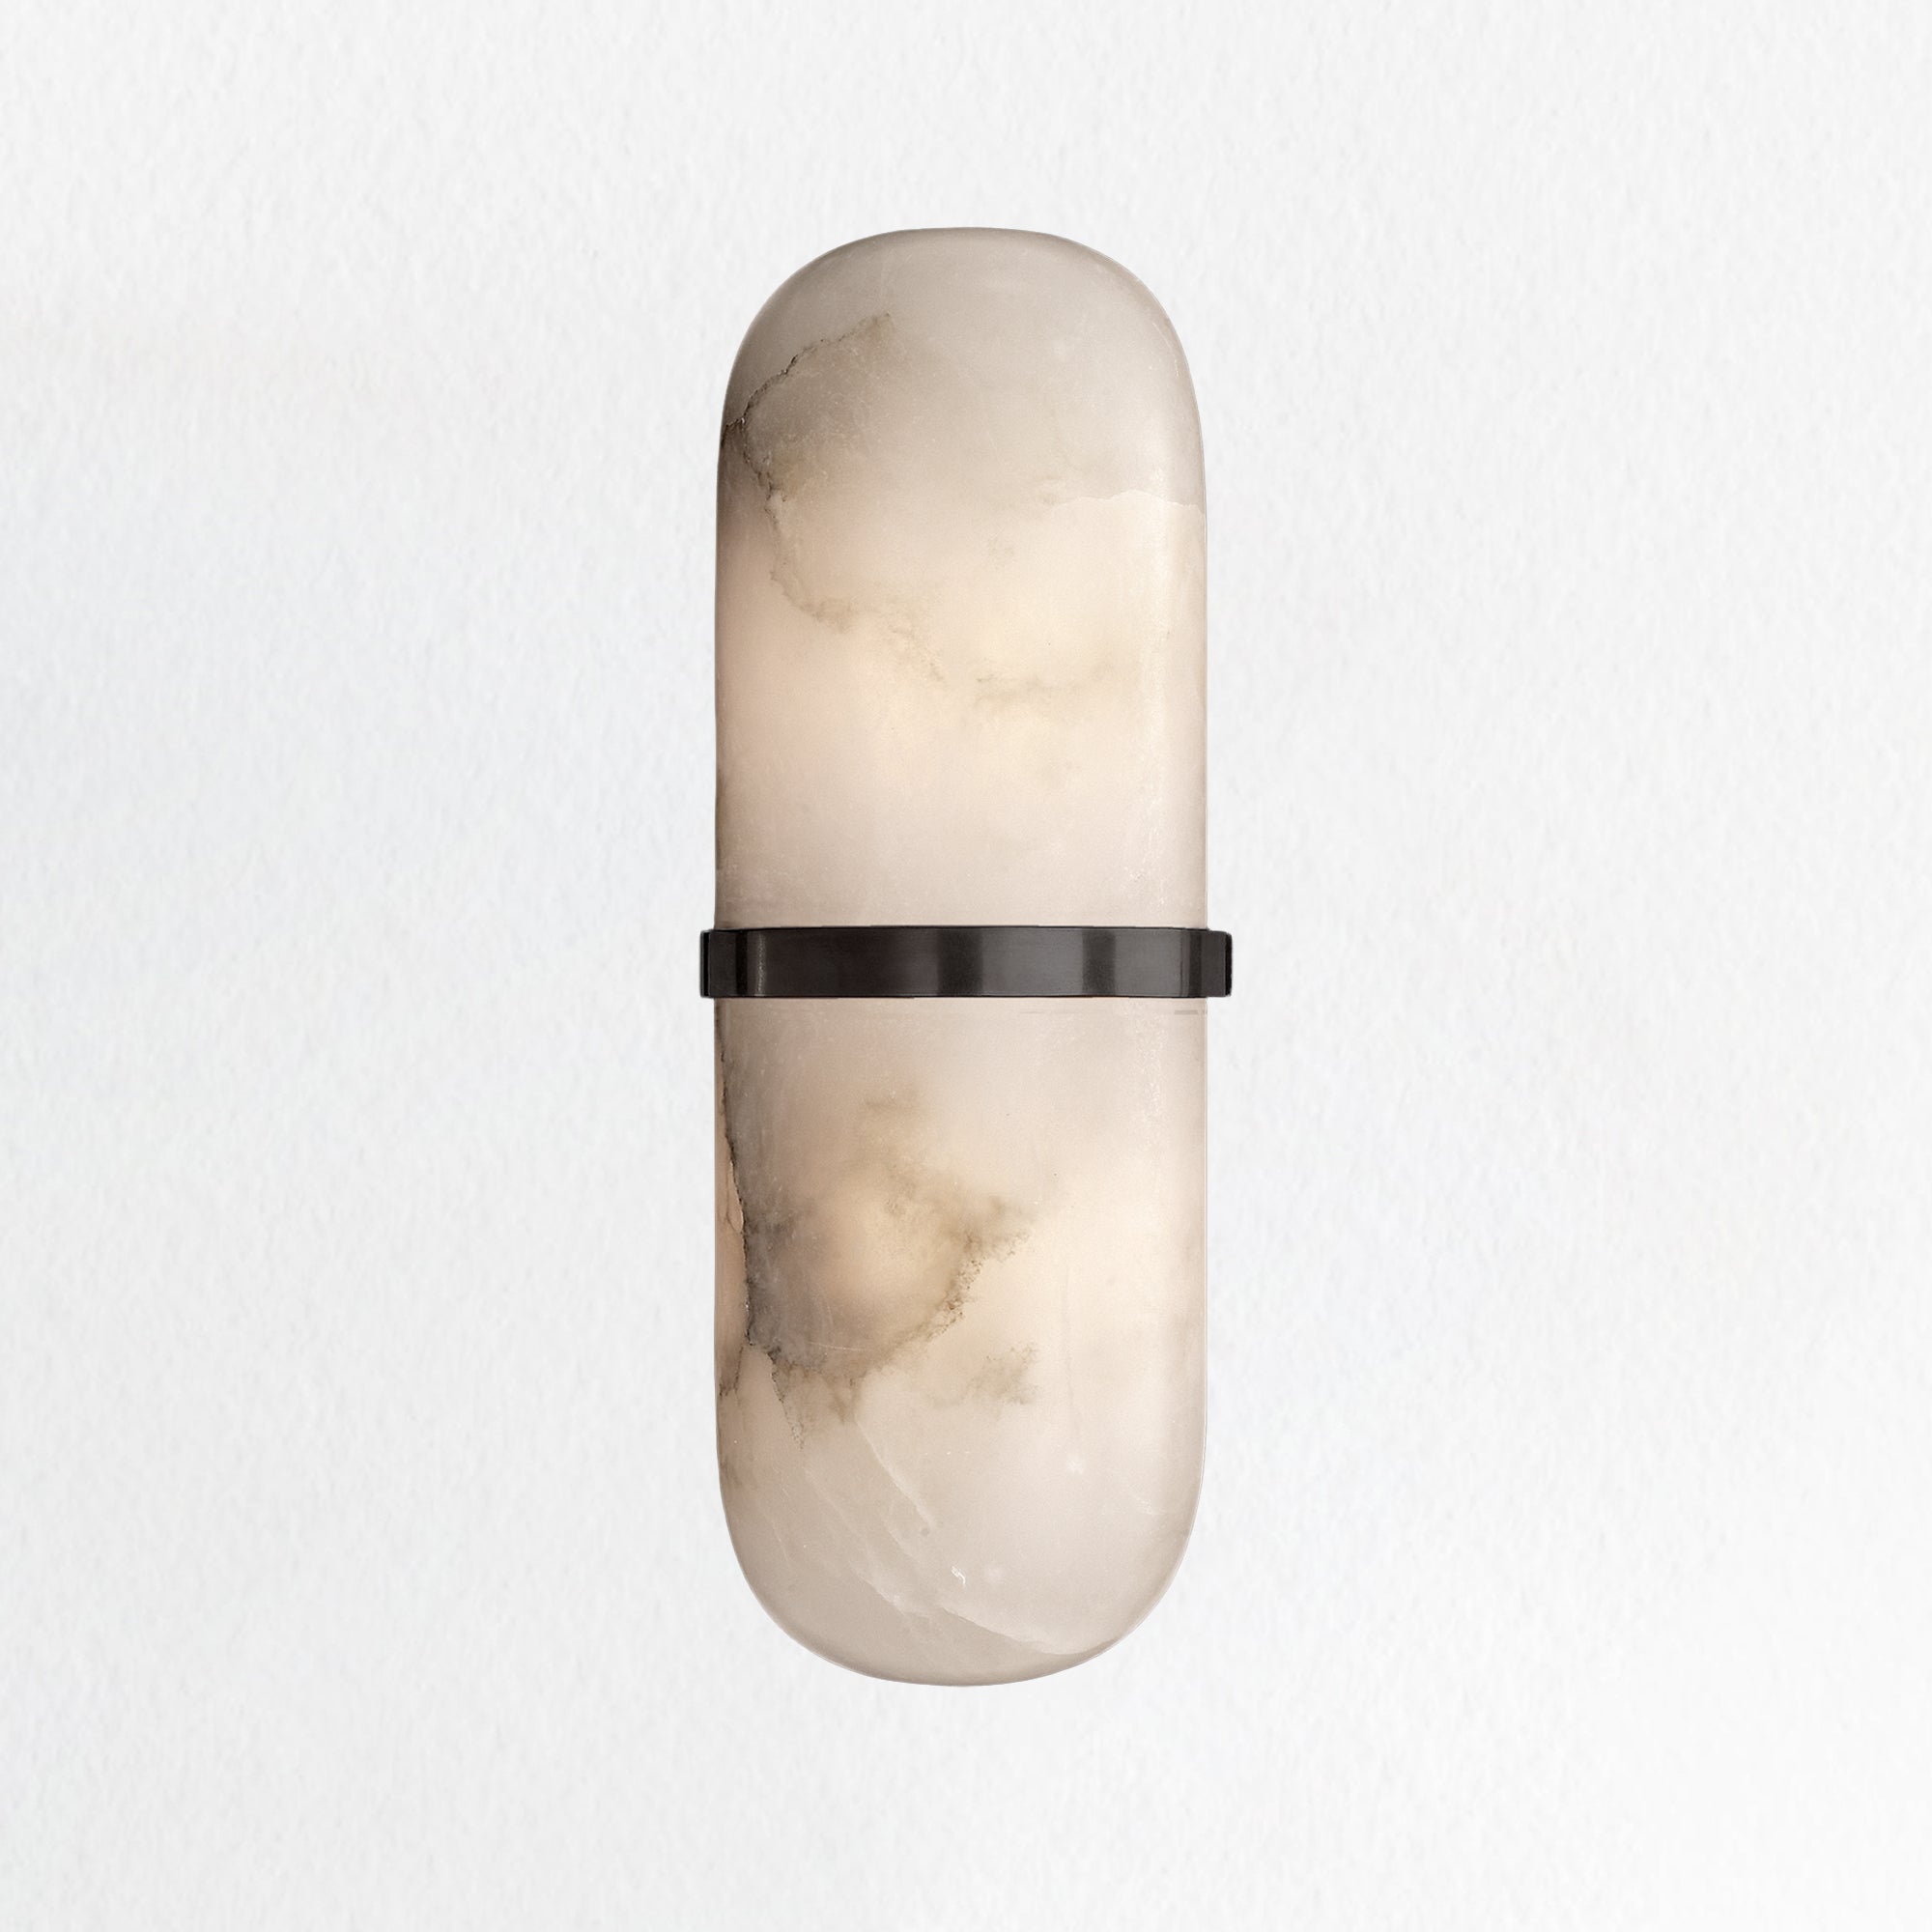 Alabaster Pill-shaped Wall Sconce 12.5"H x 4.25" W